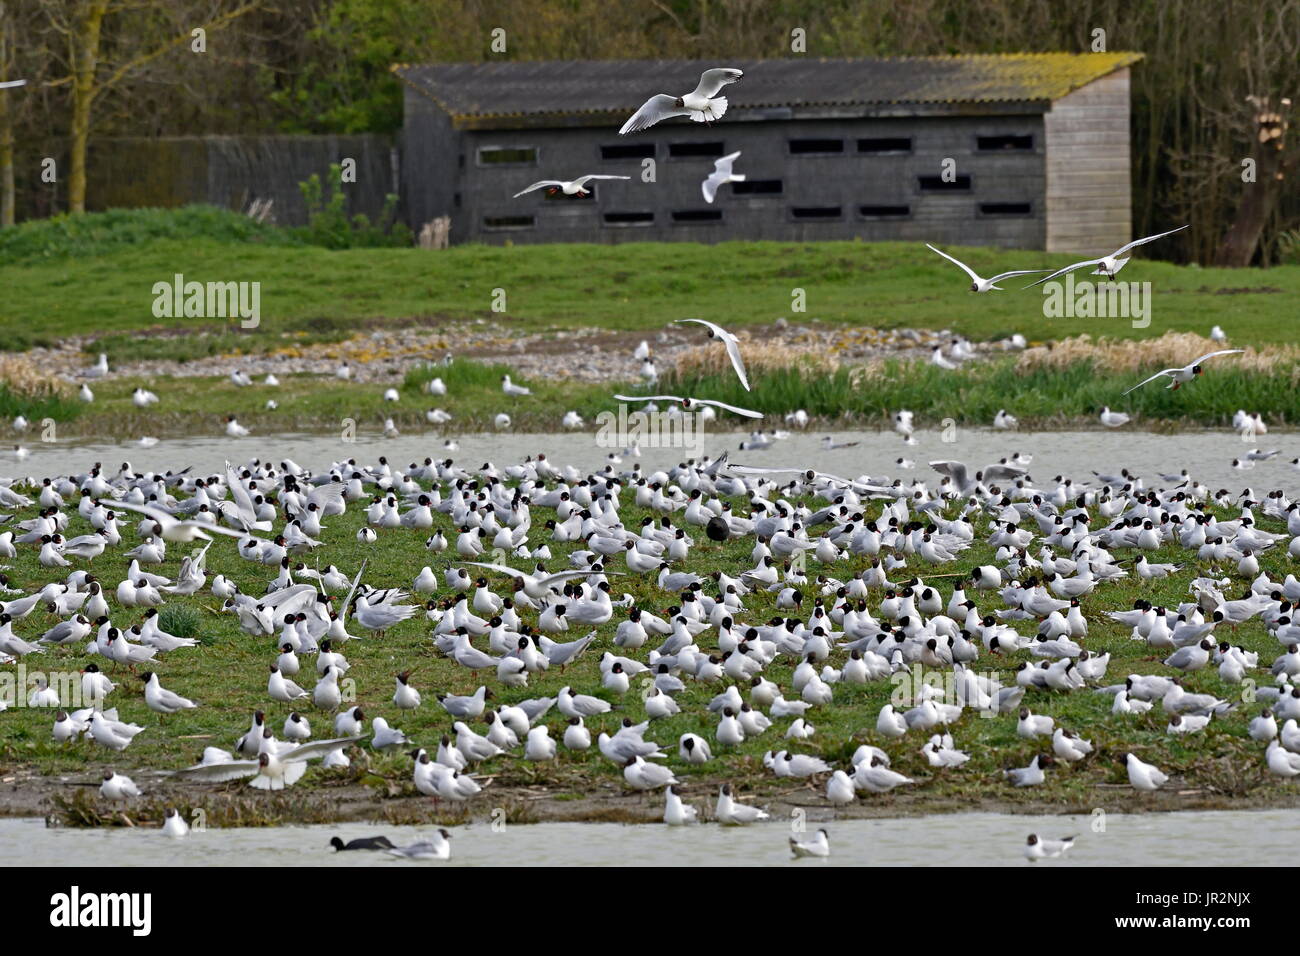 Observation watch and colony of Black-headed Gulls (Croicocephalus ridibundus) in breeding season, Somme bay Natural Reserve, France Stock Photo